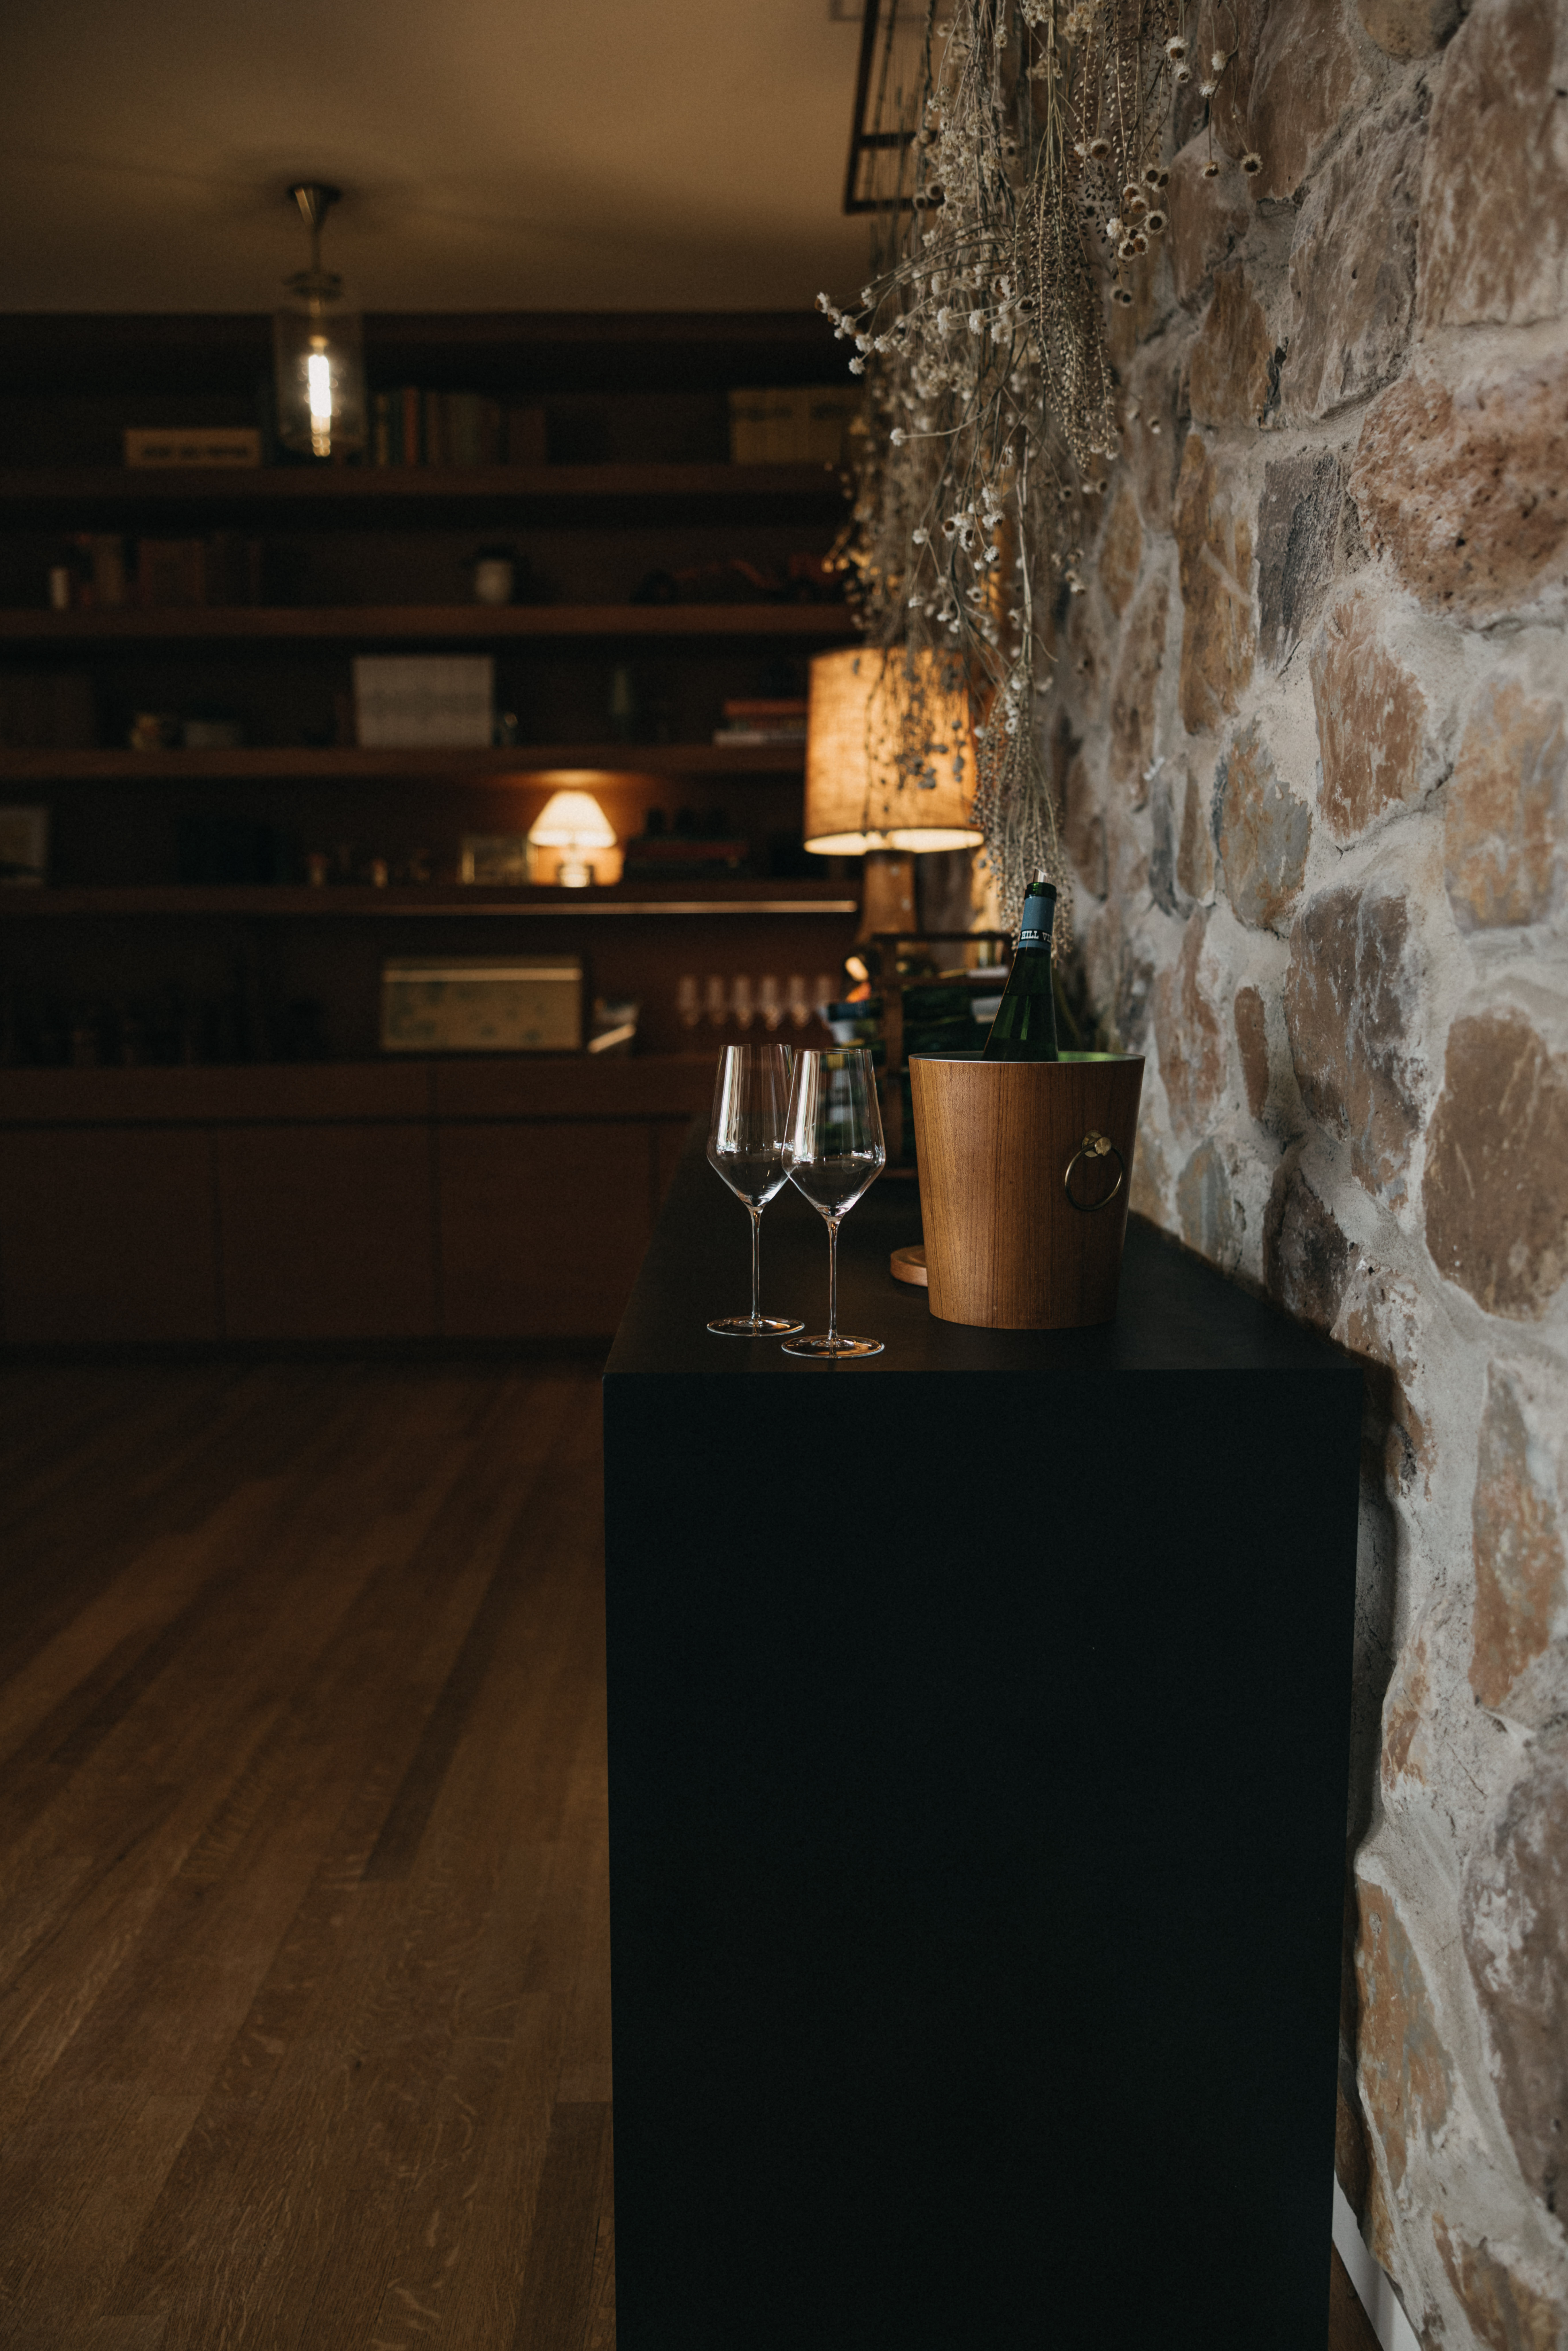 Inside the Stony Hill residence, a stone wall and table next to the wall with wine glasses and a bottle of Stony Hill.